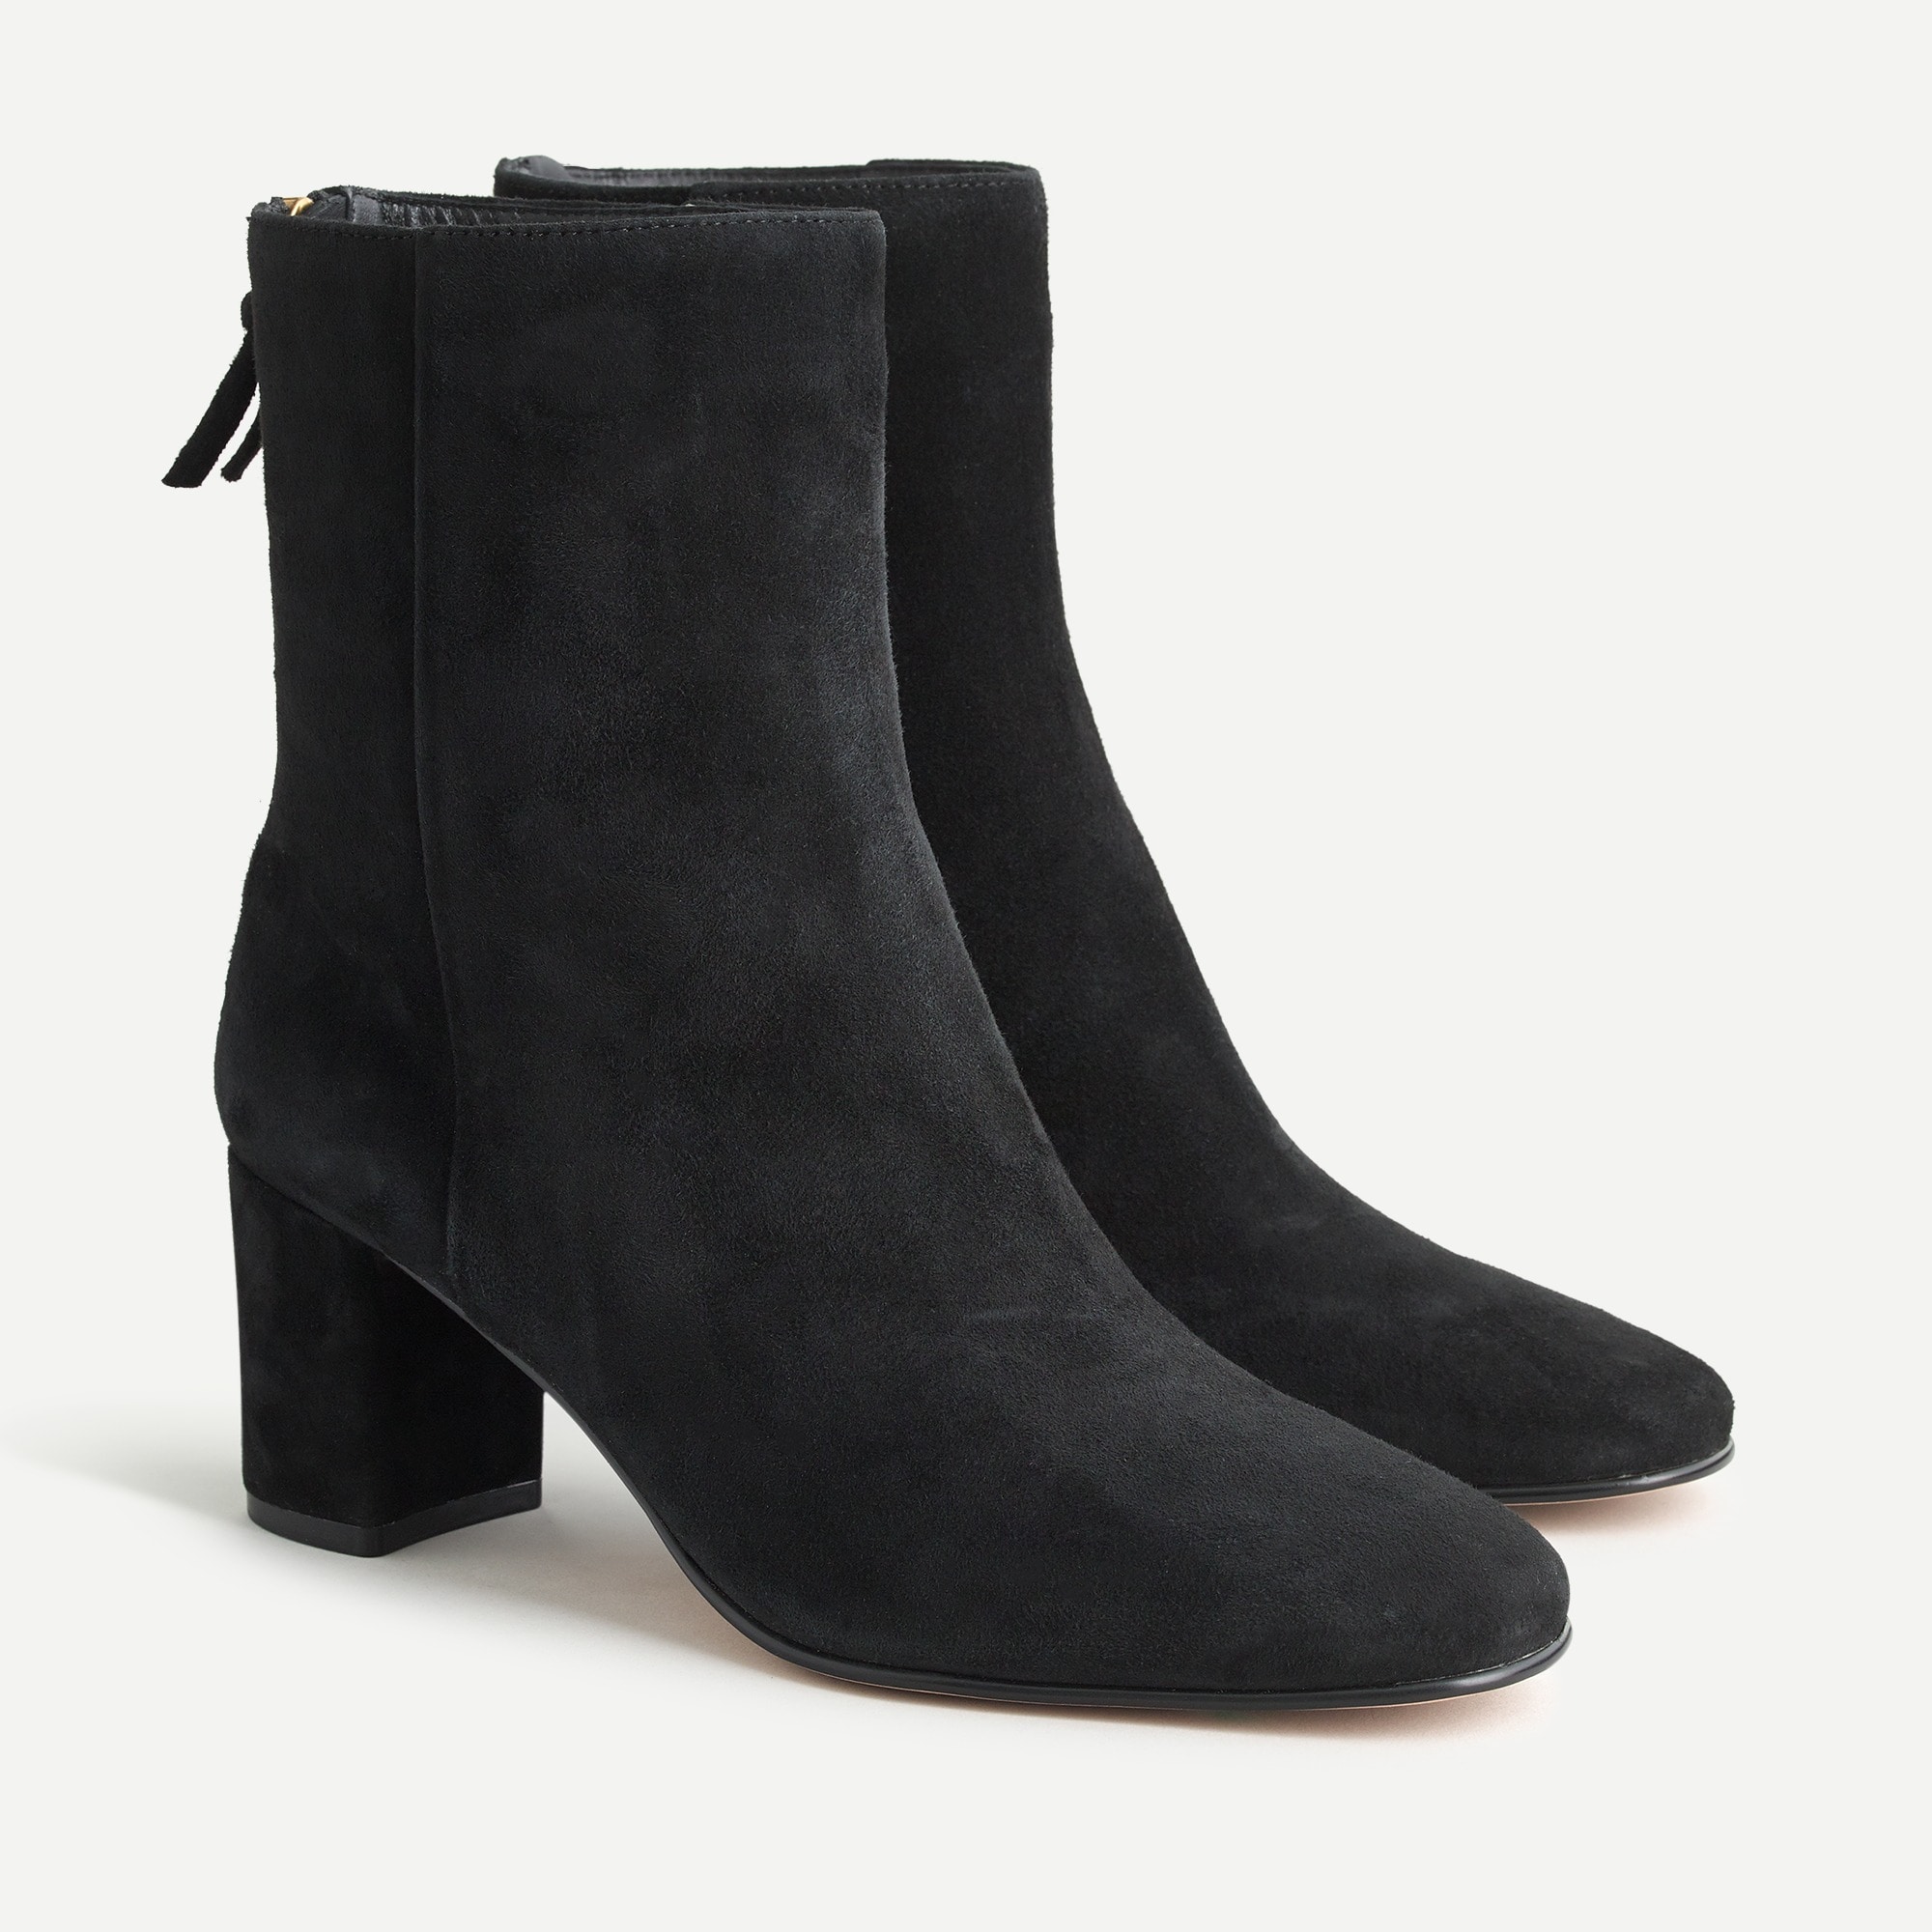 J.Crew: Willa Kid Suede Ankle Boots For 